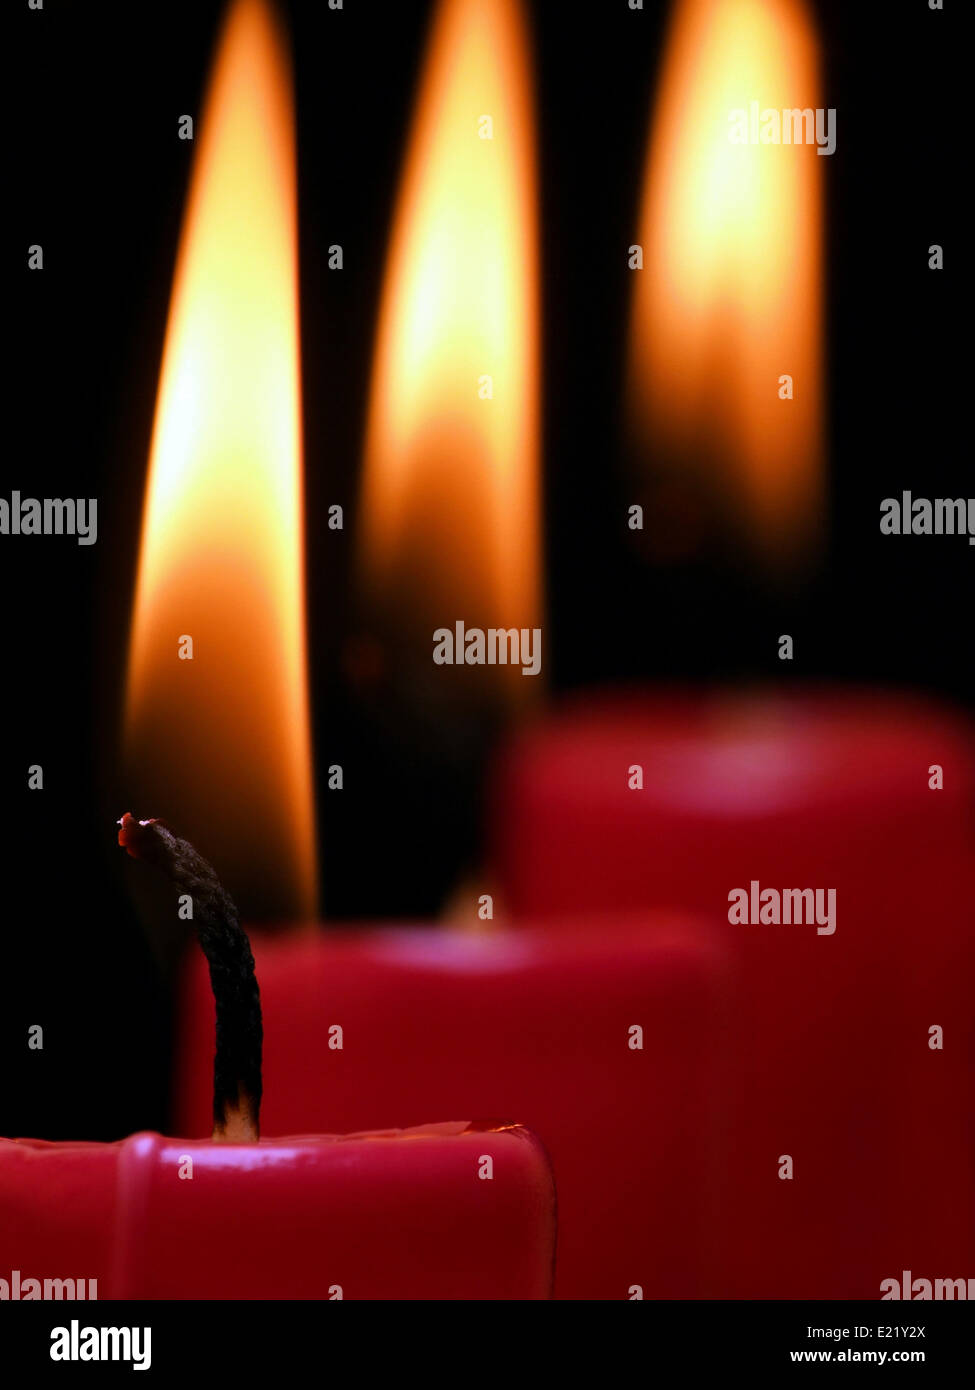 three lighted candles Stock Photo